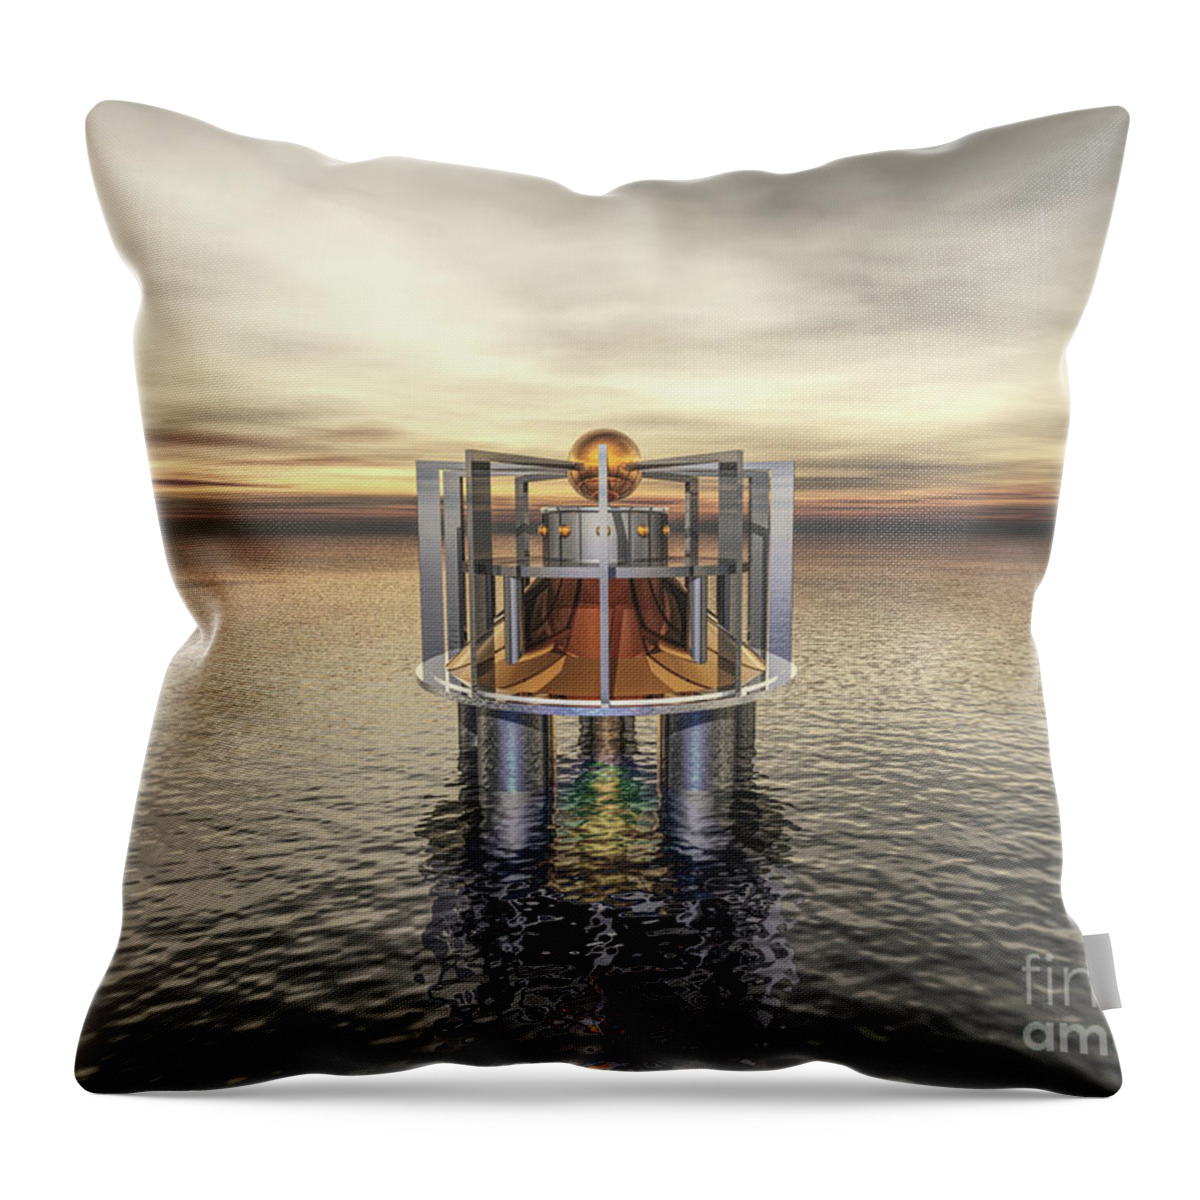 Structure Throw Pillow featuring the digital art Mysterious Structure At Sea by Phil Perkins